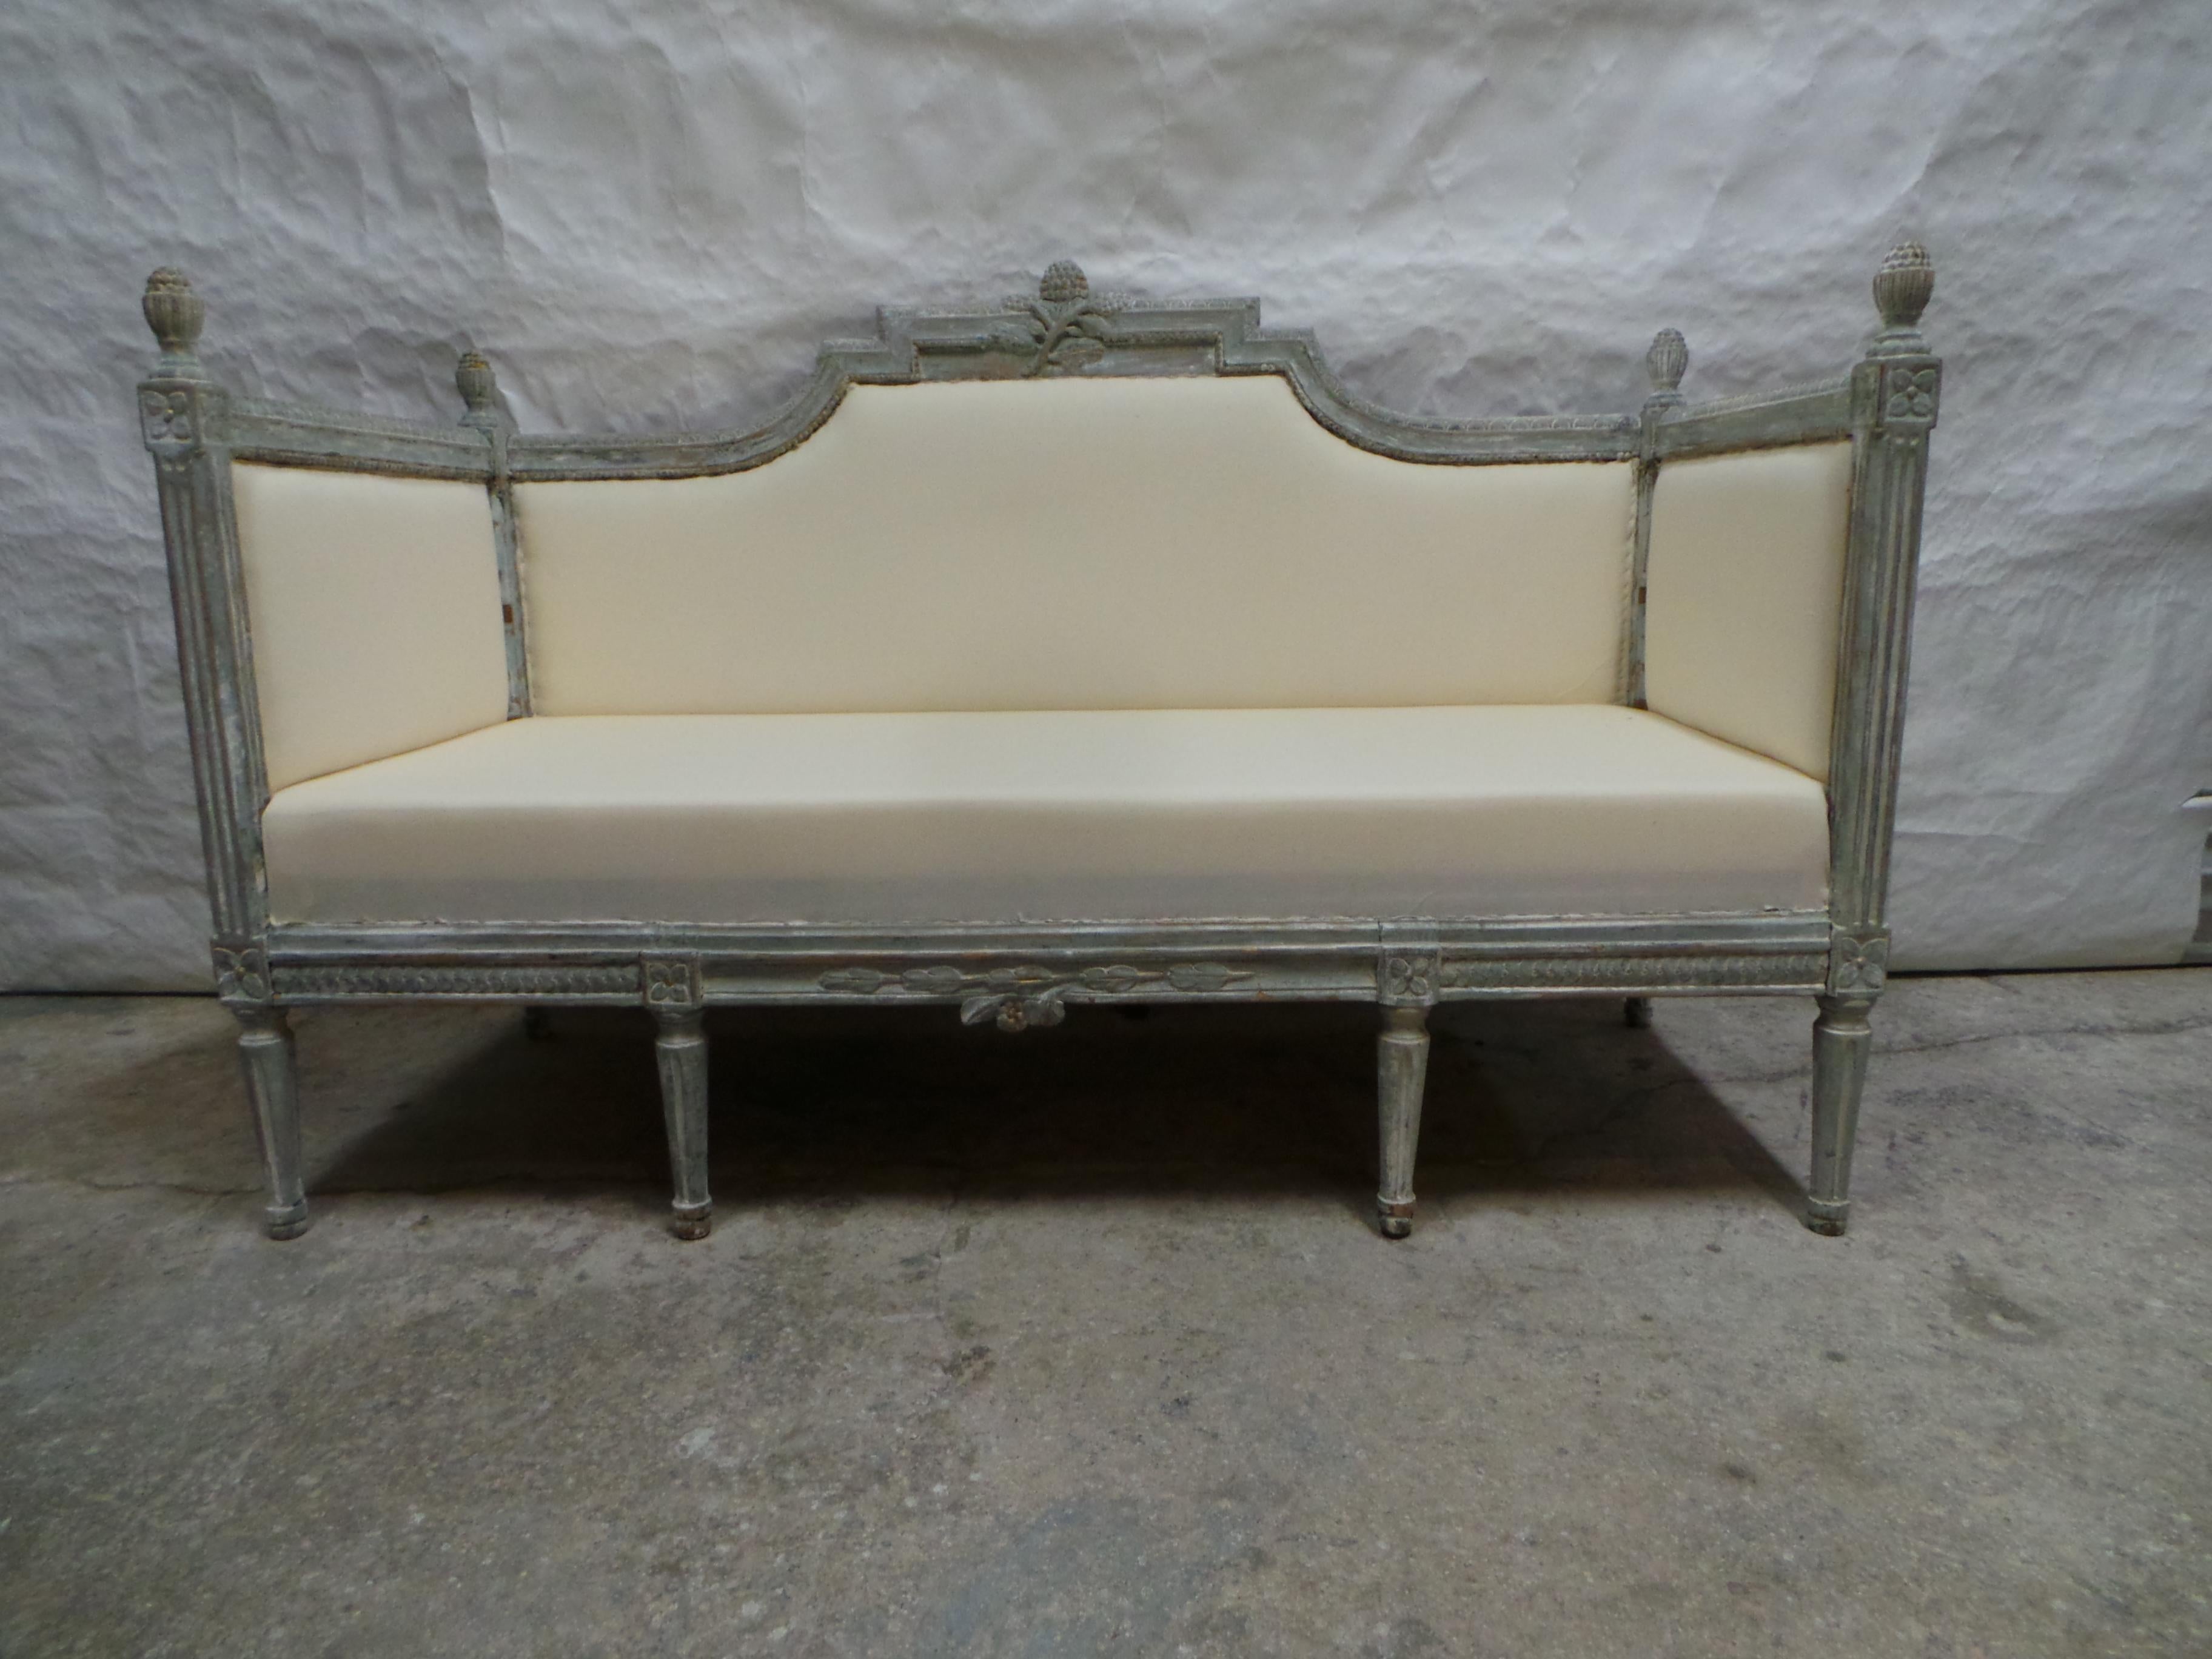 This is a Incredible Blue Original Painted Swedish Gustavian Sofa.
the seating has been restored and covered in Muslin.